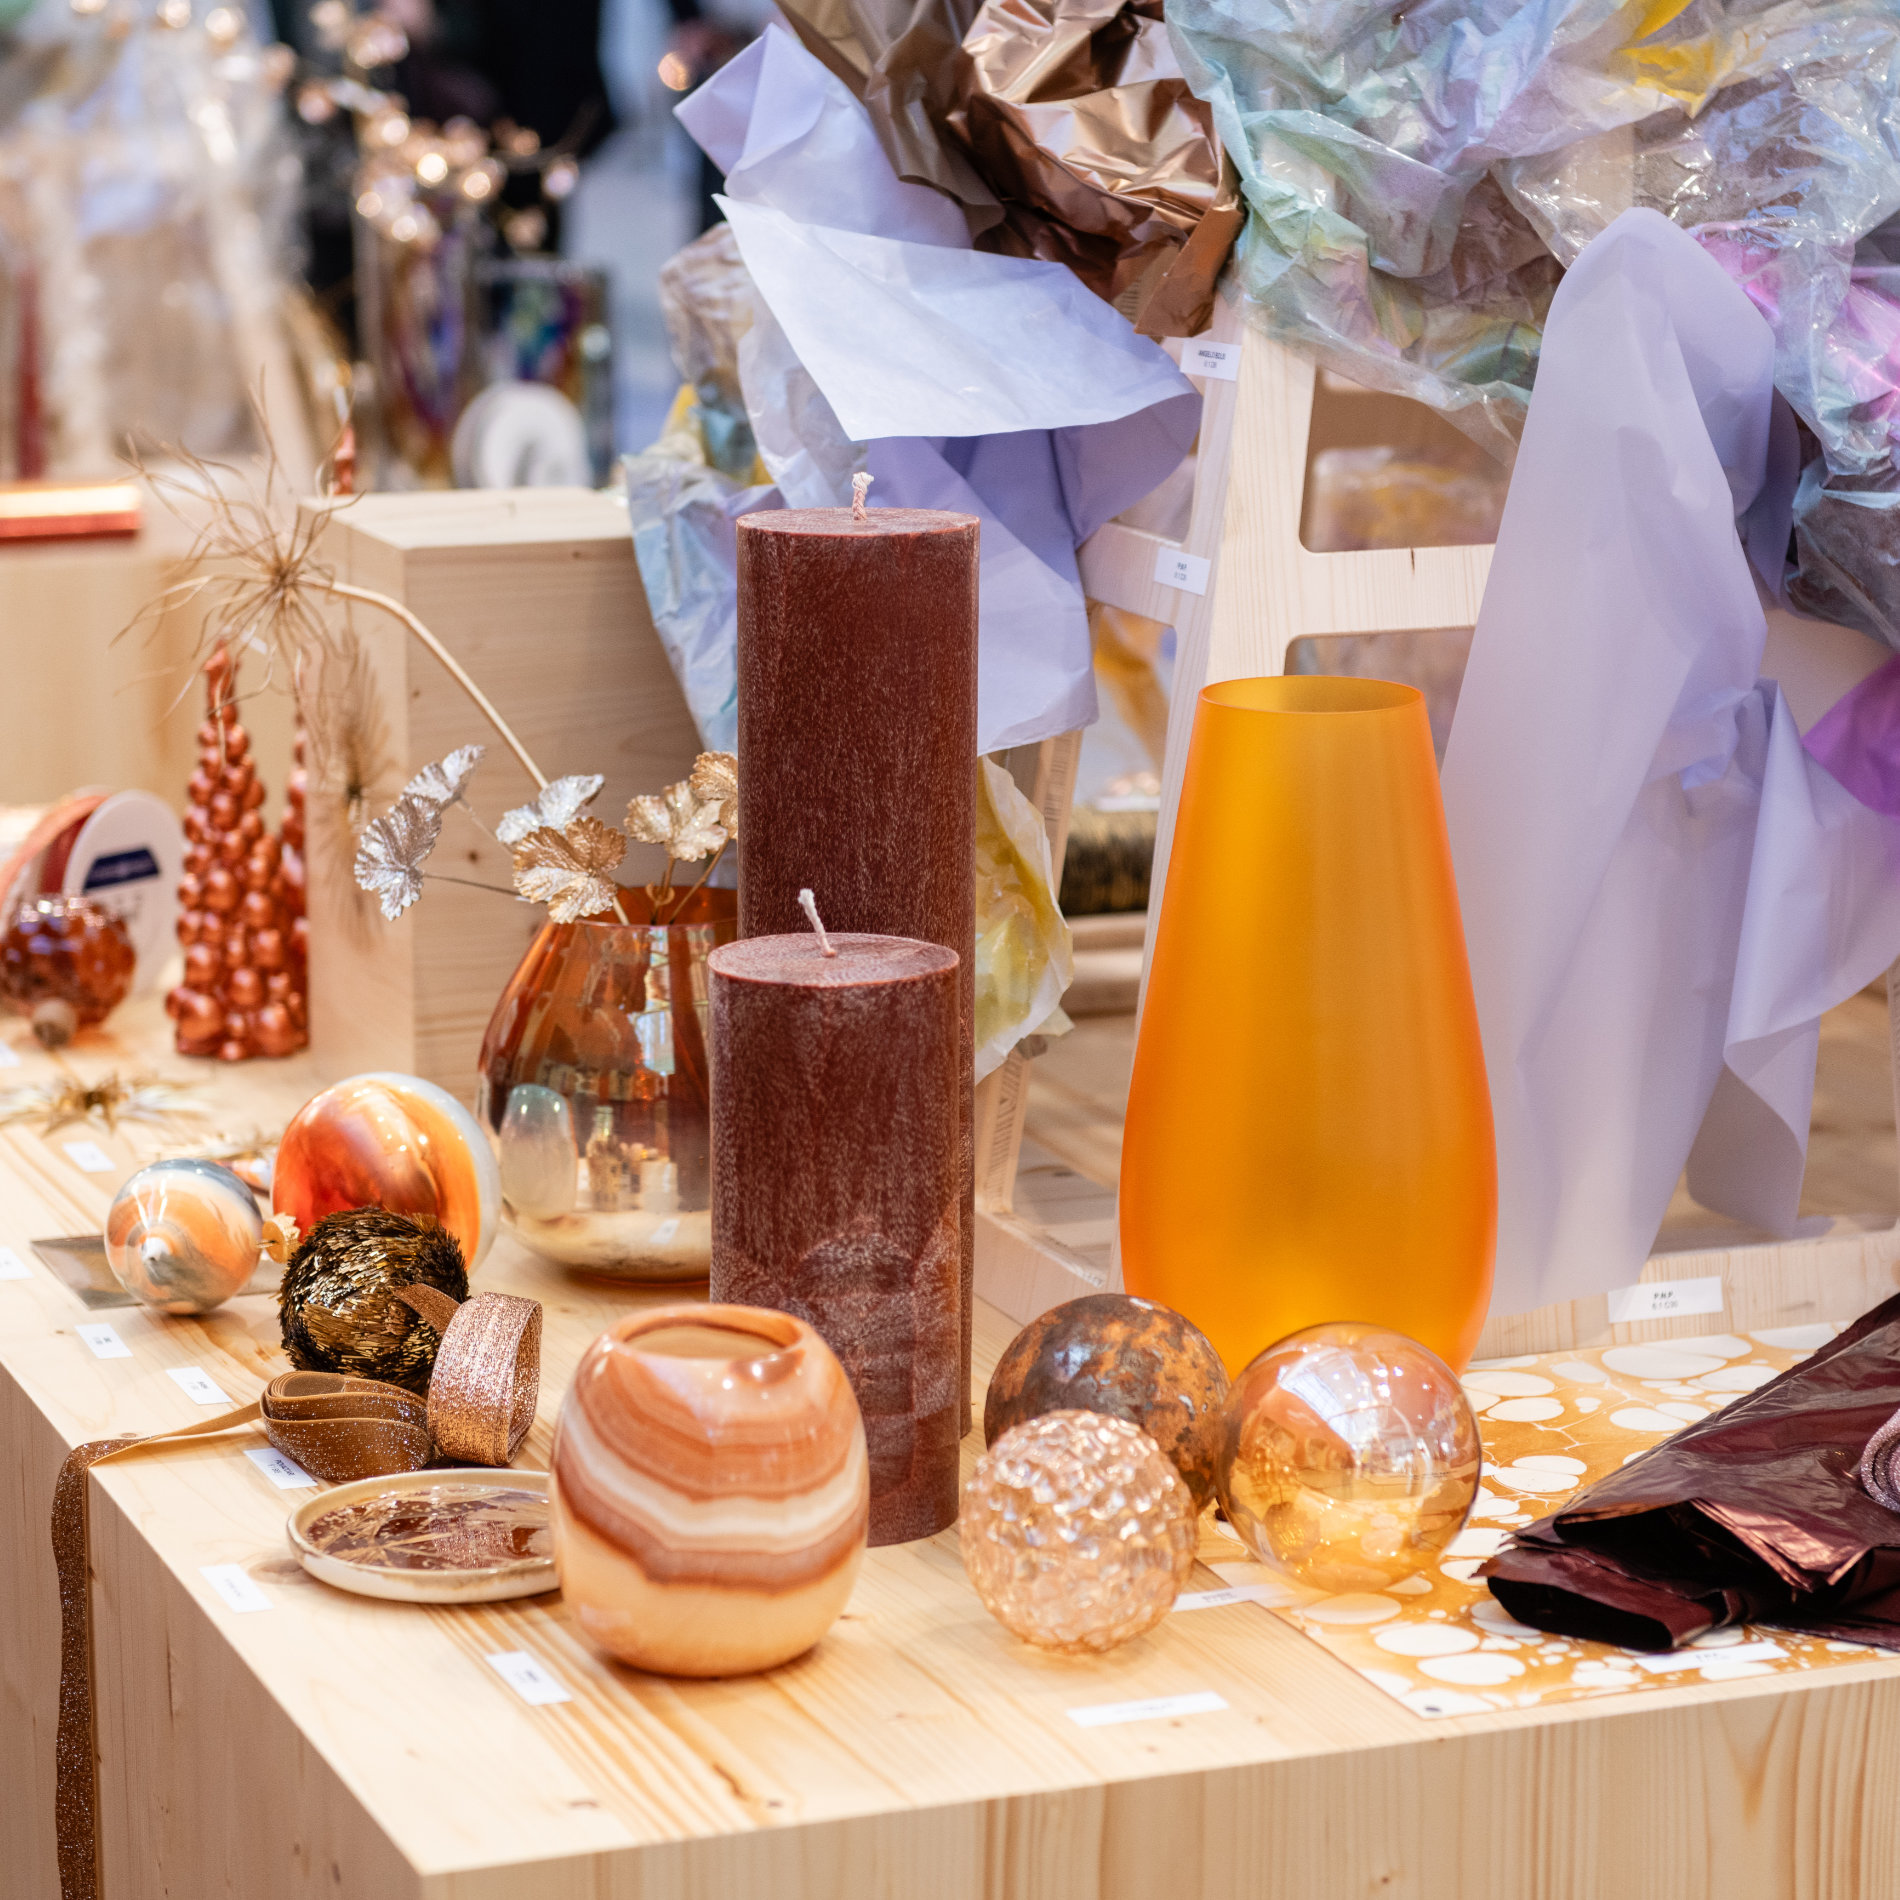 Decoration at Christmasworld: vases, candles, baubles on a wooden table